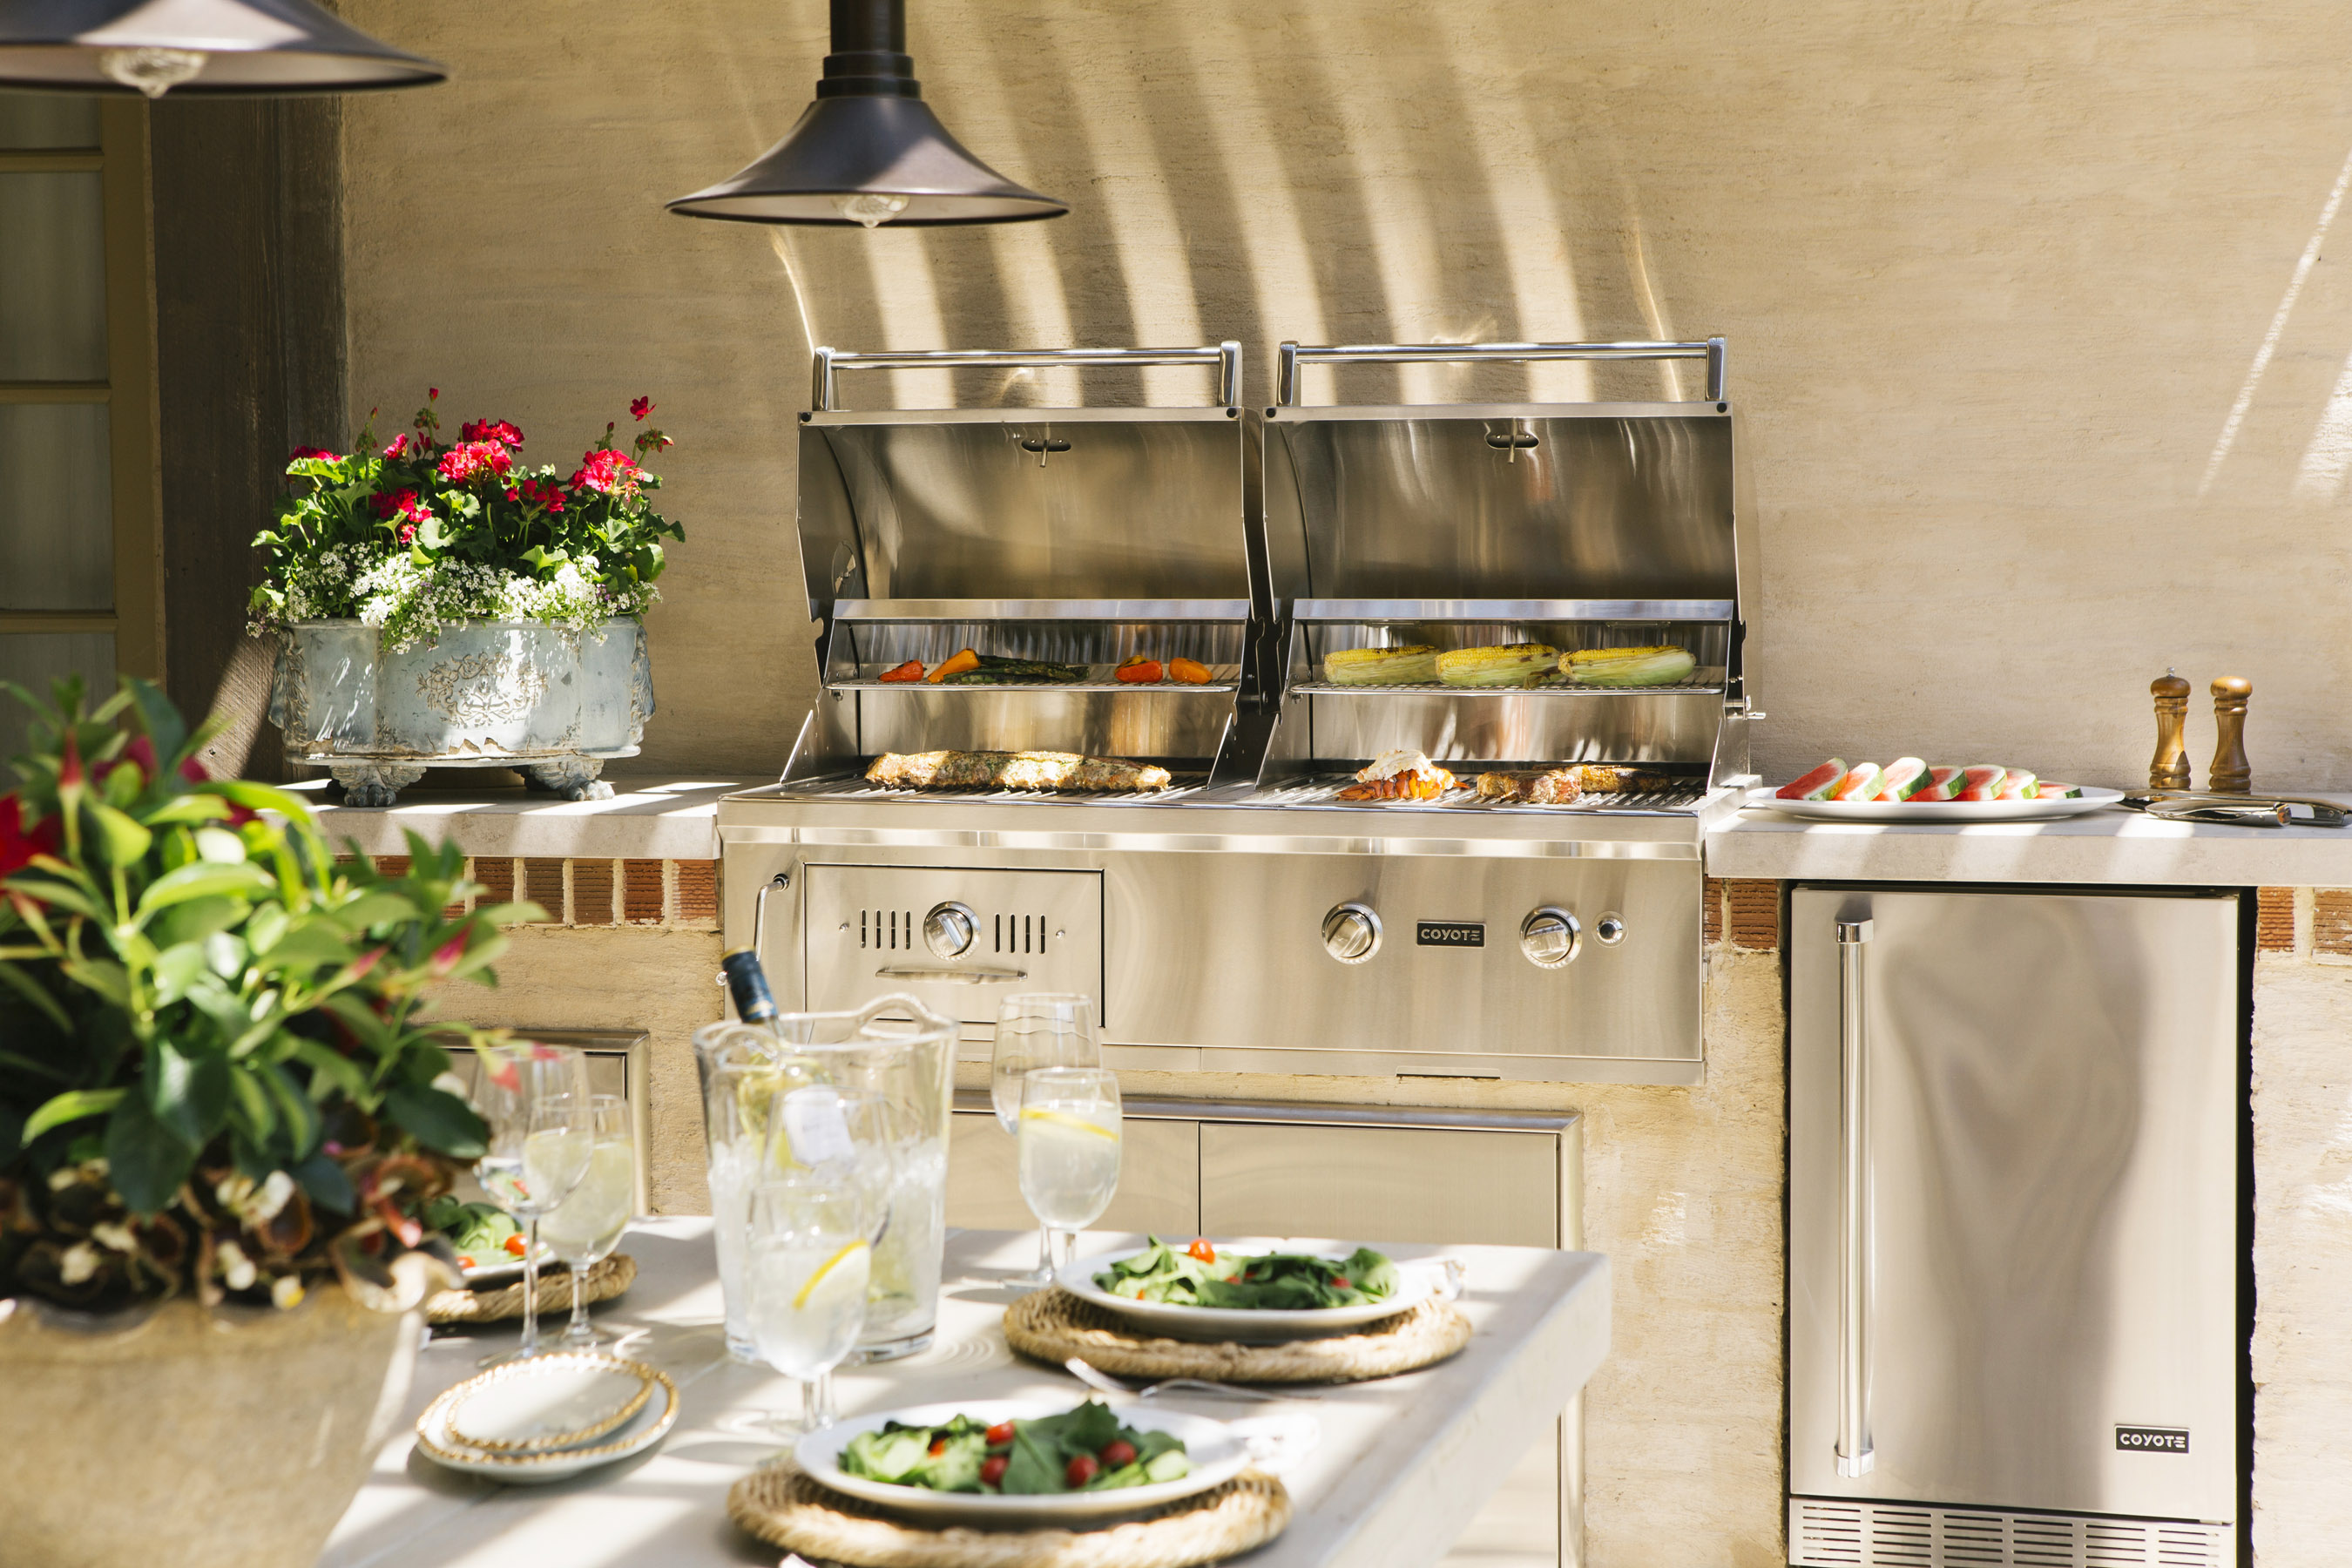 History of Outdoor Kitchens